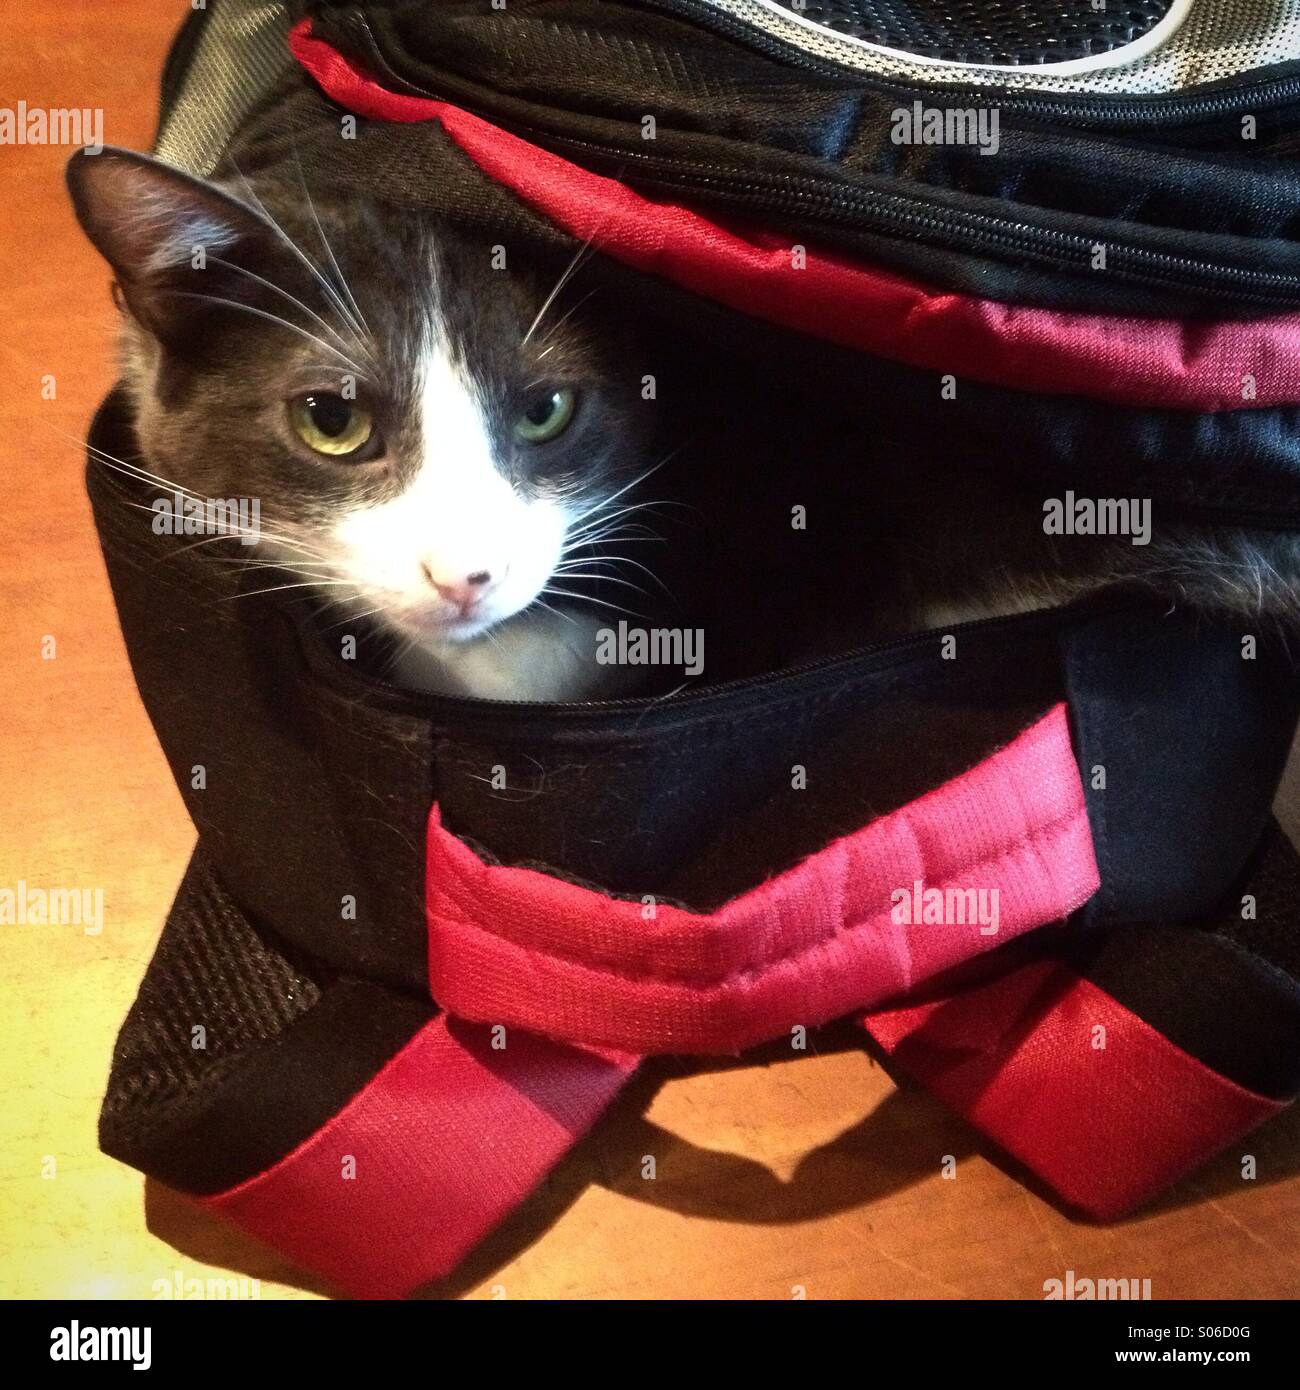 A cat stands inside a bag in Colonia Roma, Mexico City, Mexico Stock Photo